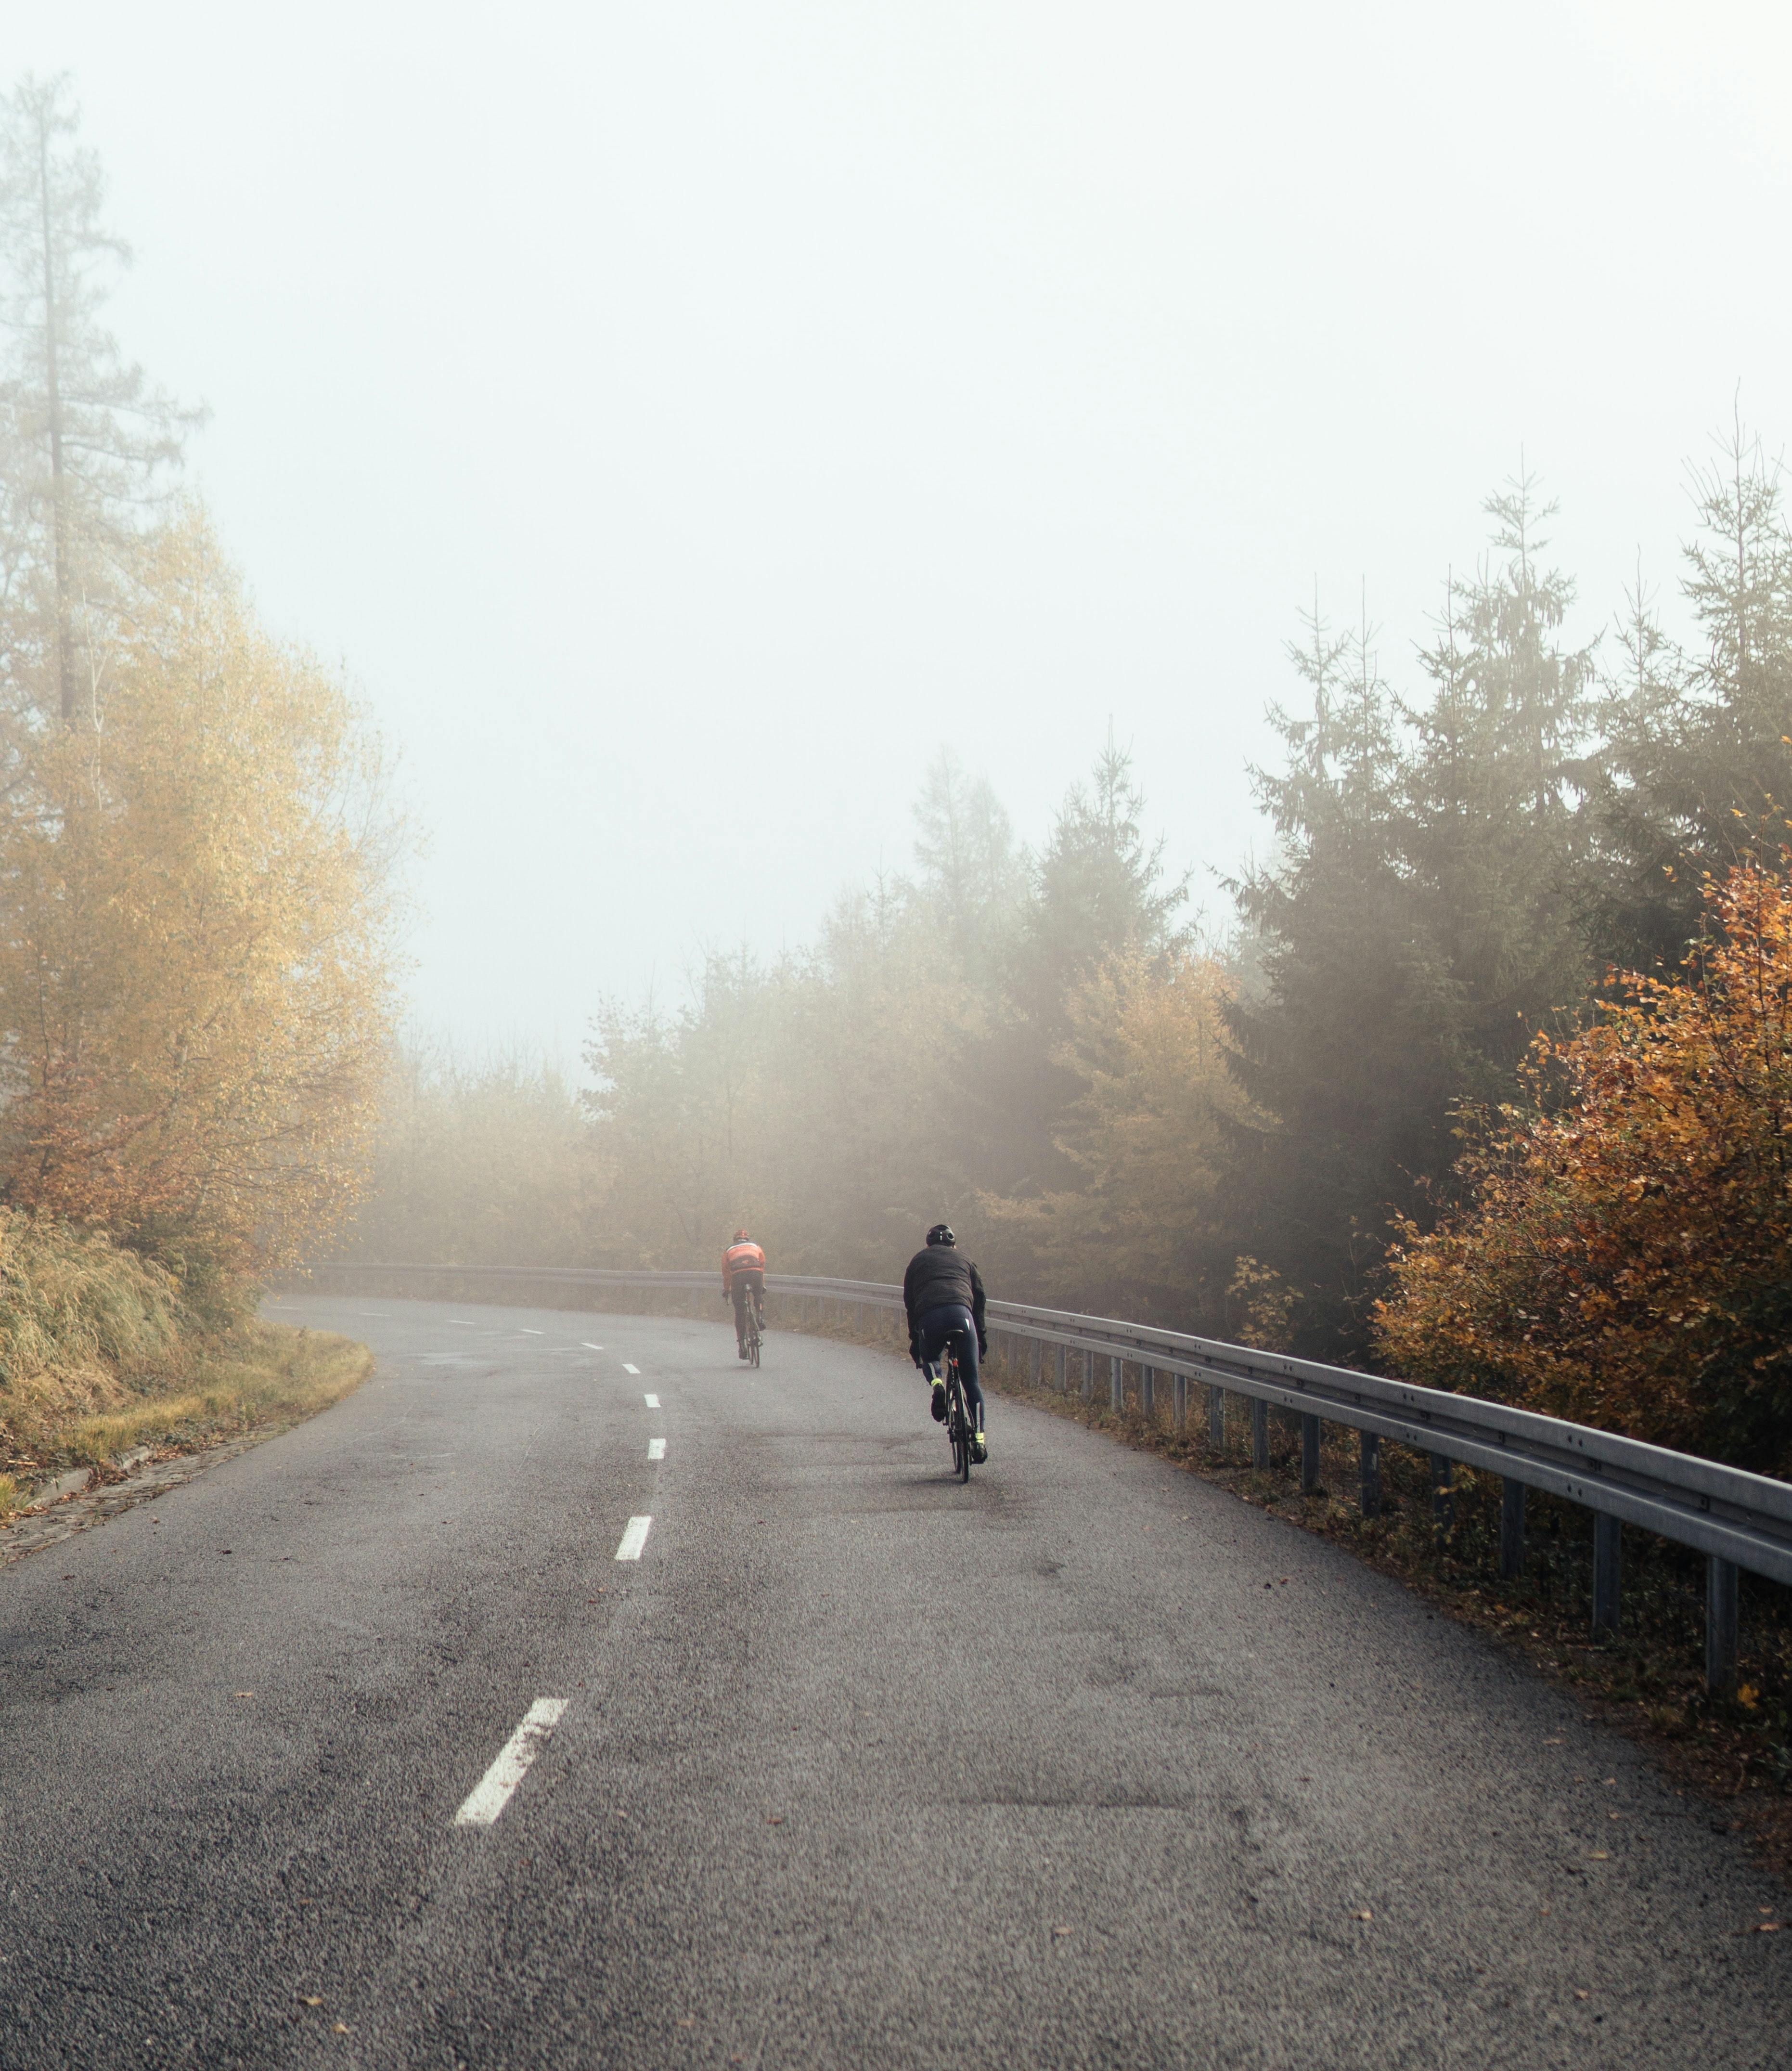 Two road bikers rise into the fog. The trees on the edge of the road are turning color in the fall.